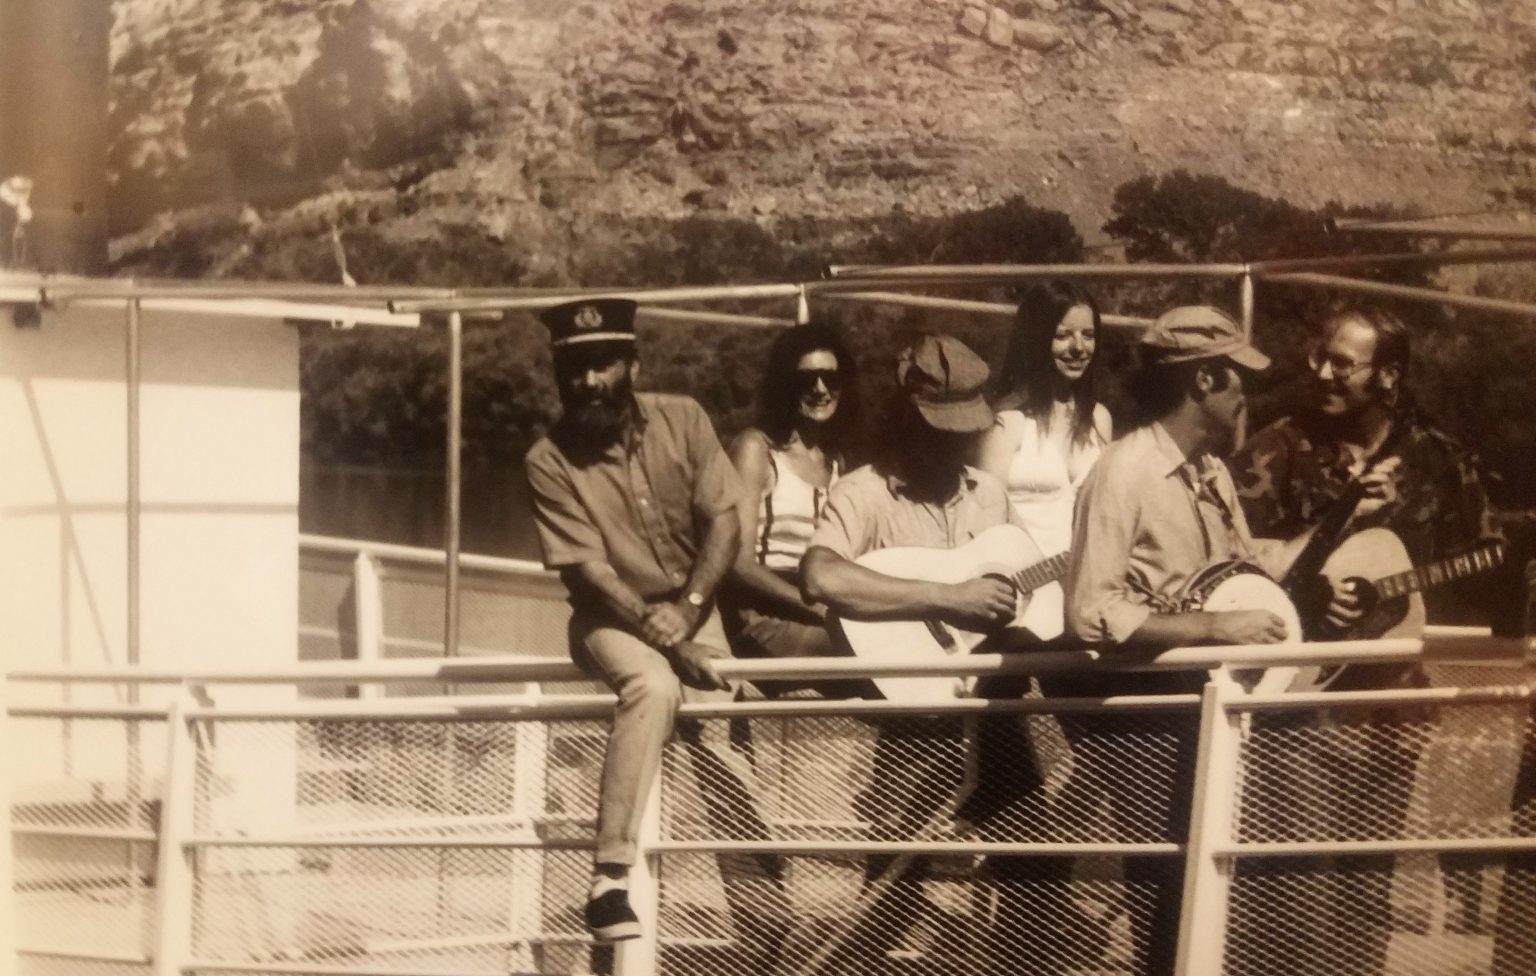 A group of six people are pictured on an old tour boat. Three of them are playing guitars. Tex McClatchy, identifiable because of his beard, wears a captains hat as he leans over the side of the boat.